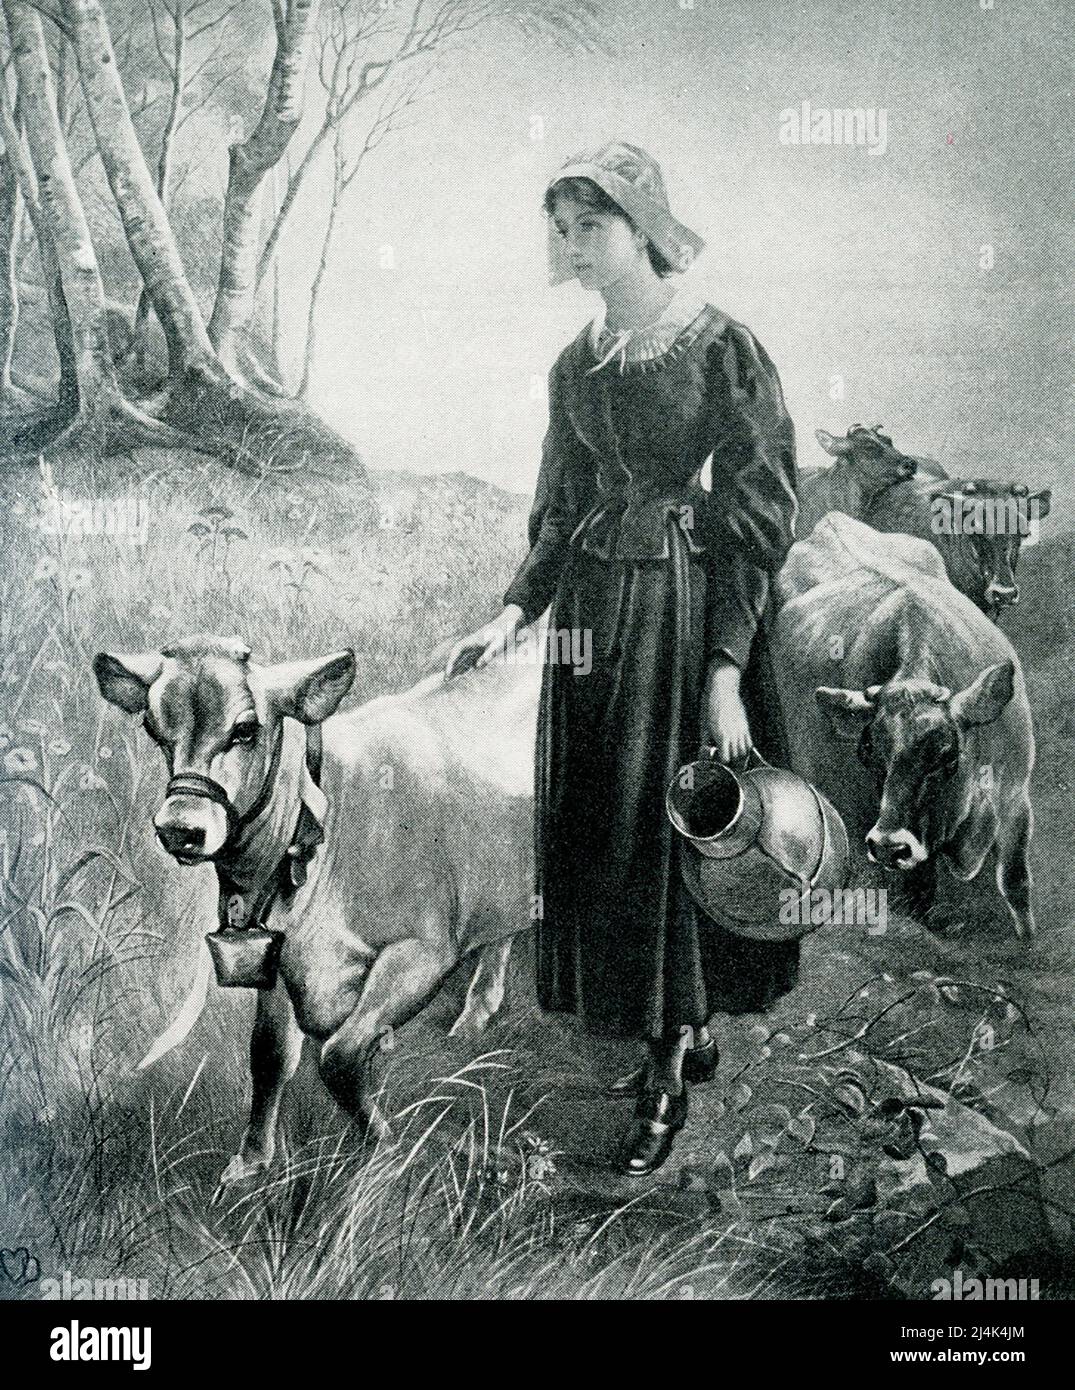 The 1903 caption reads: 'Evangeline from painting by Douglas.' Evangeline, a Tale of Acadie, is an epic poem by the American poet Henry Wadsworth Longfellow. Evangeline was an Acadian girl and the story tells of her search for her lost love named Gabriel. It is set in the time of the Expulsion of the Acadians. The expulsion was the forced removal of the Acadian people by the British during the French and Indian War (1755-1764). They were removed from the Canadian Maritime Provinces of Nova Scotia, New Brunswick, Prince Edward Island, and part of Maine. It was written in English and published i Stock Photo